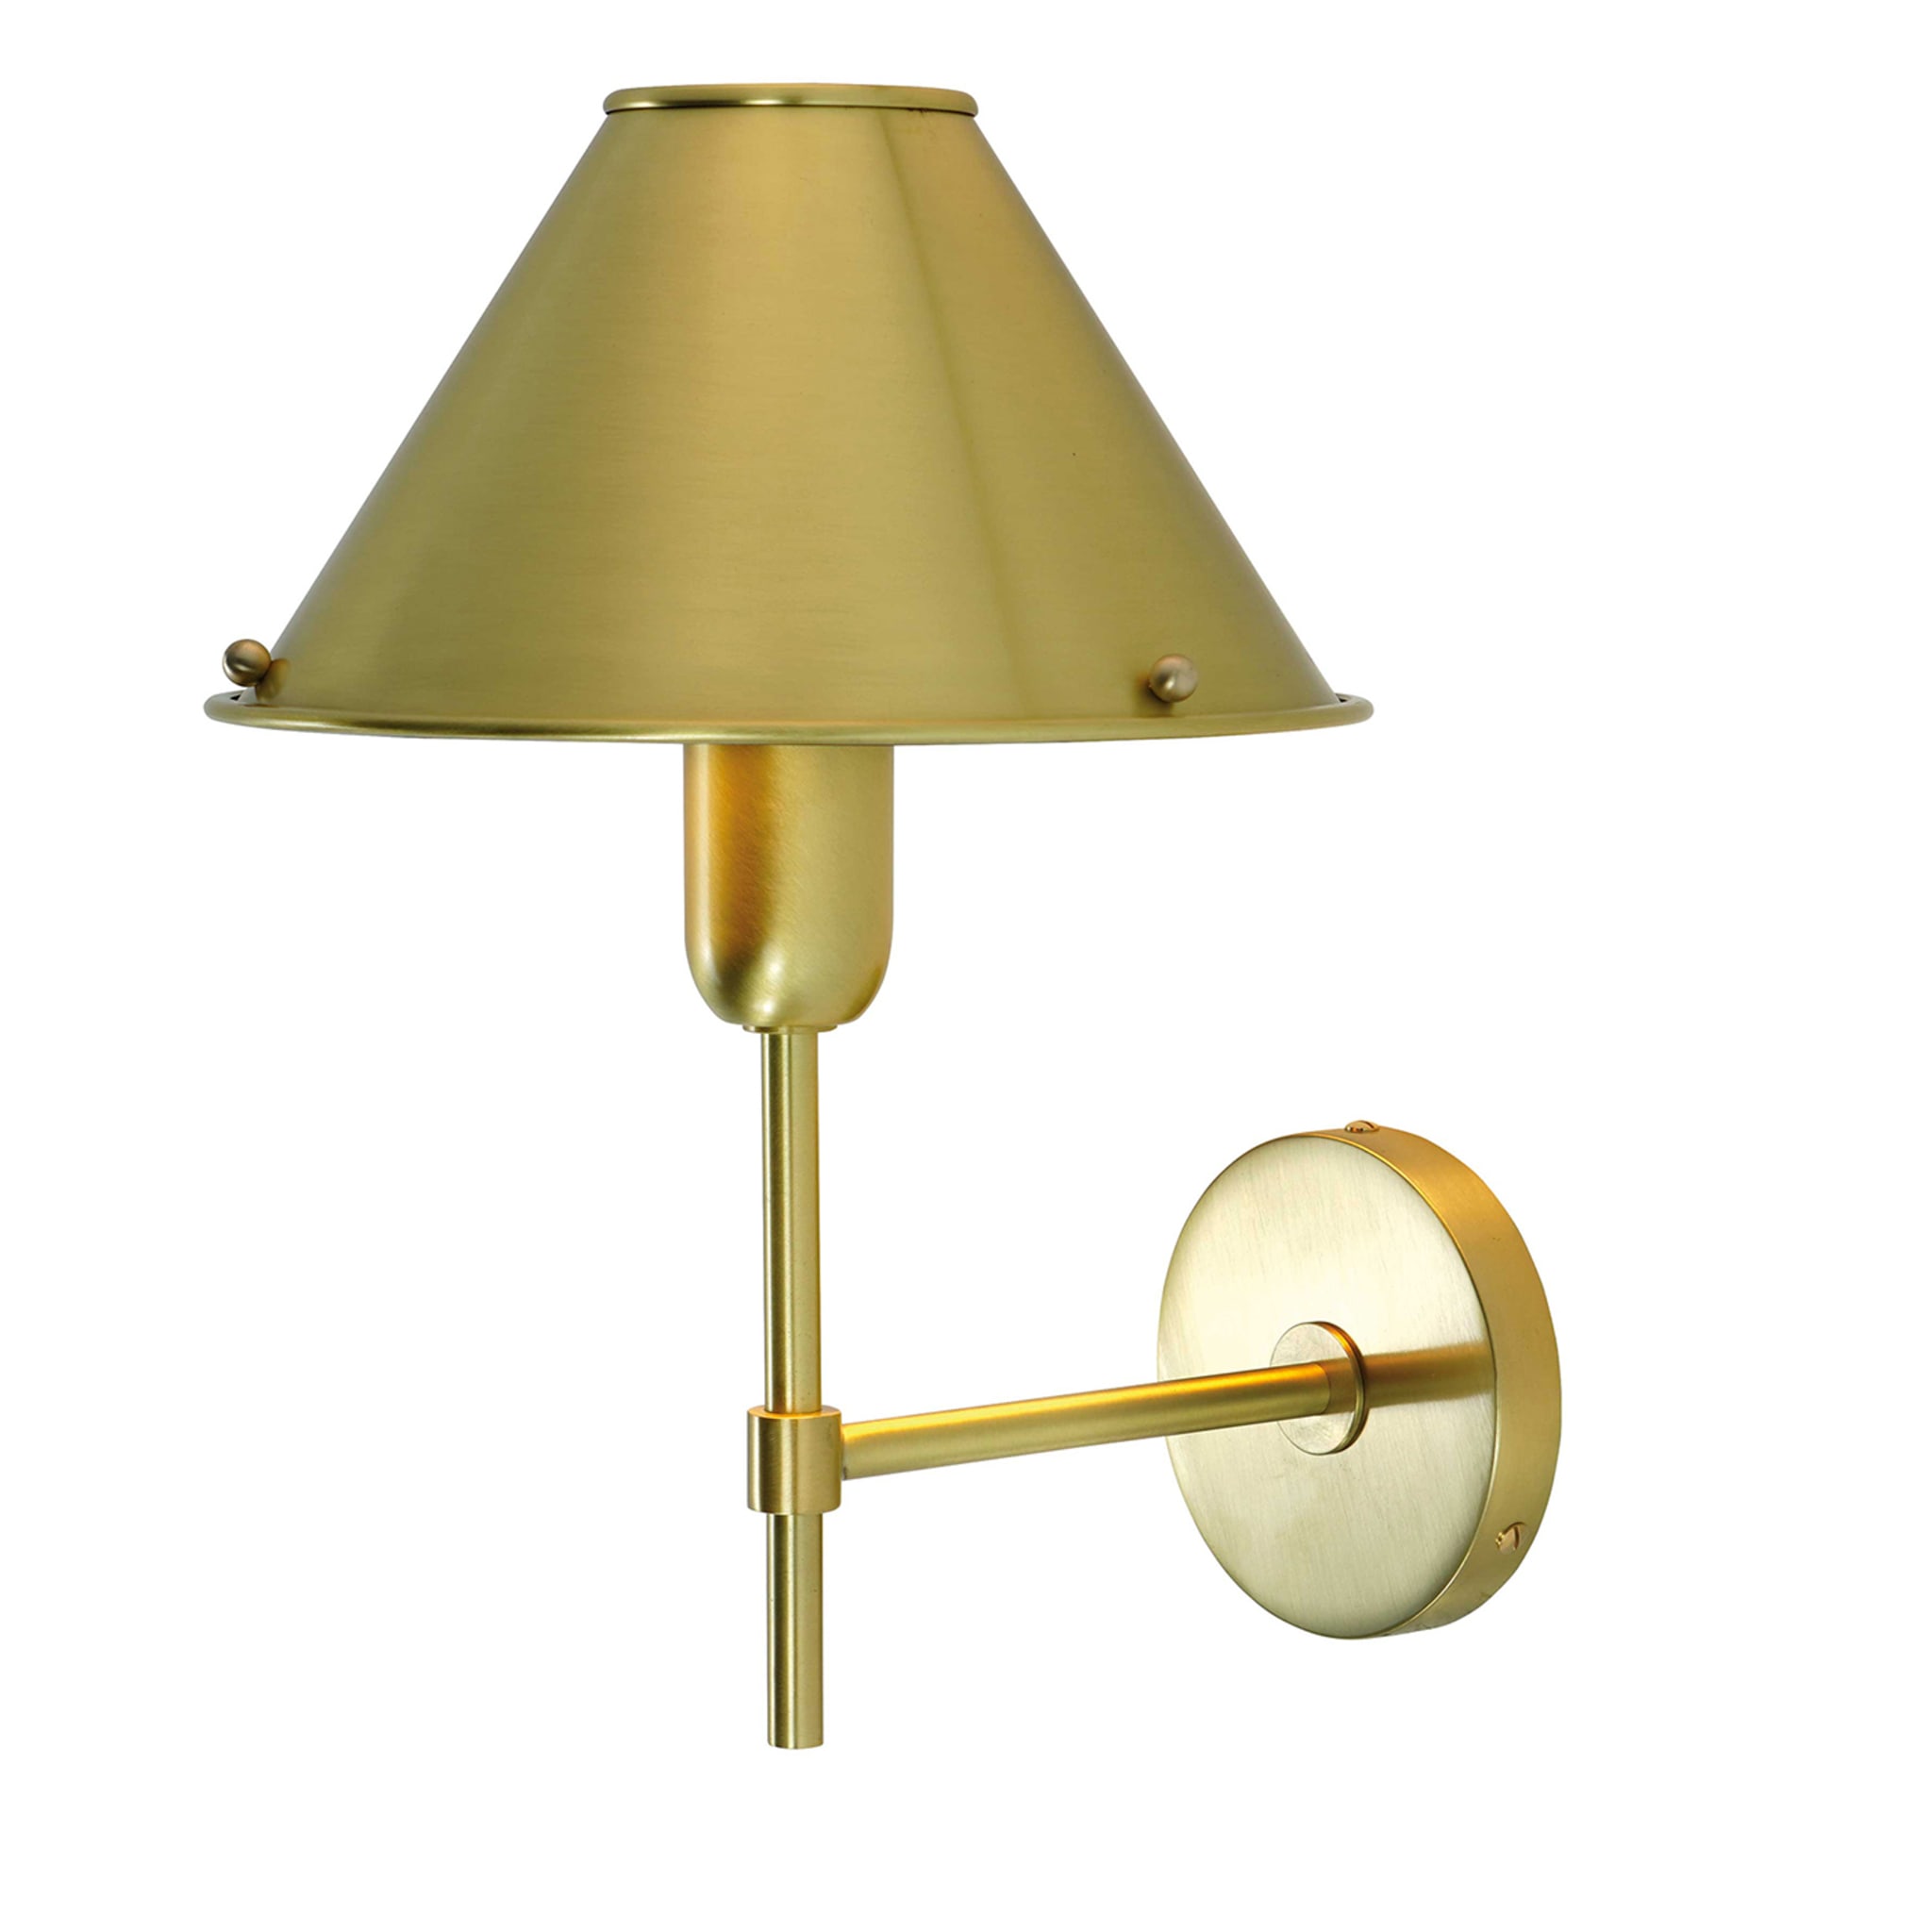 Alicya M340 Brushed Bronze Wall Lamp by Stefano Tabarin - Main view